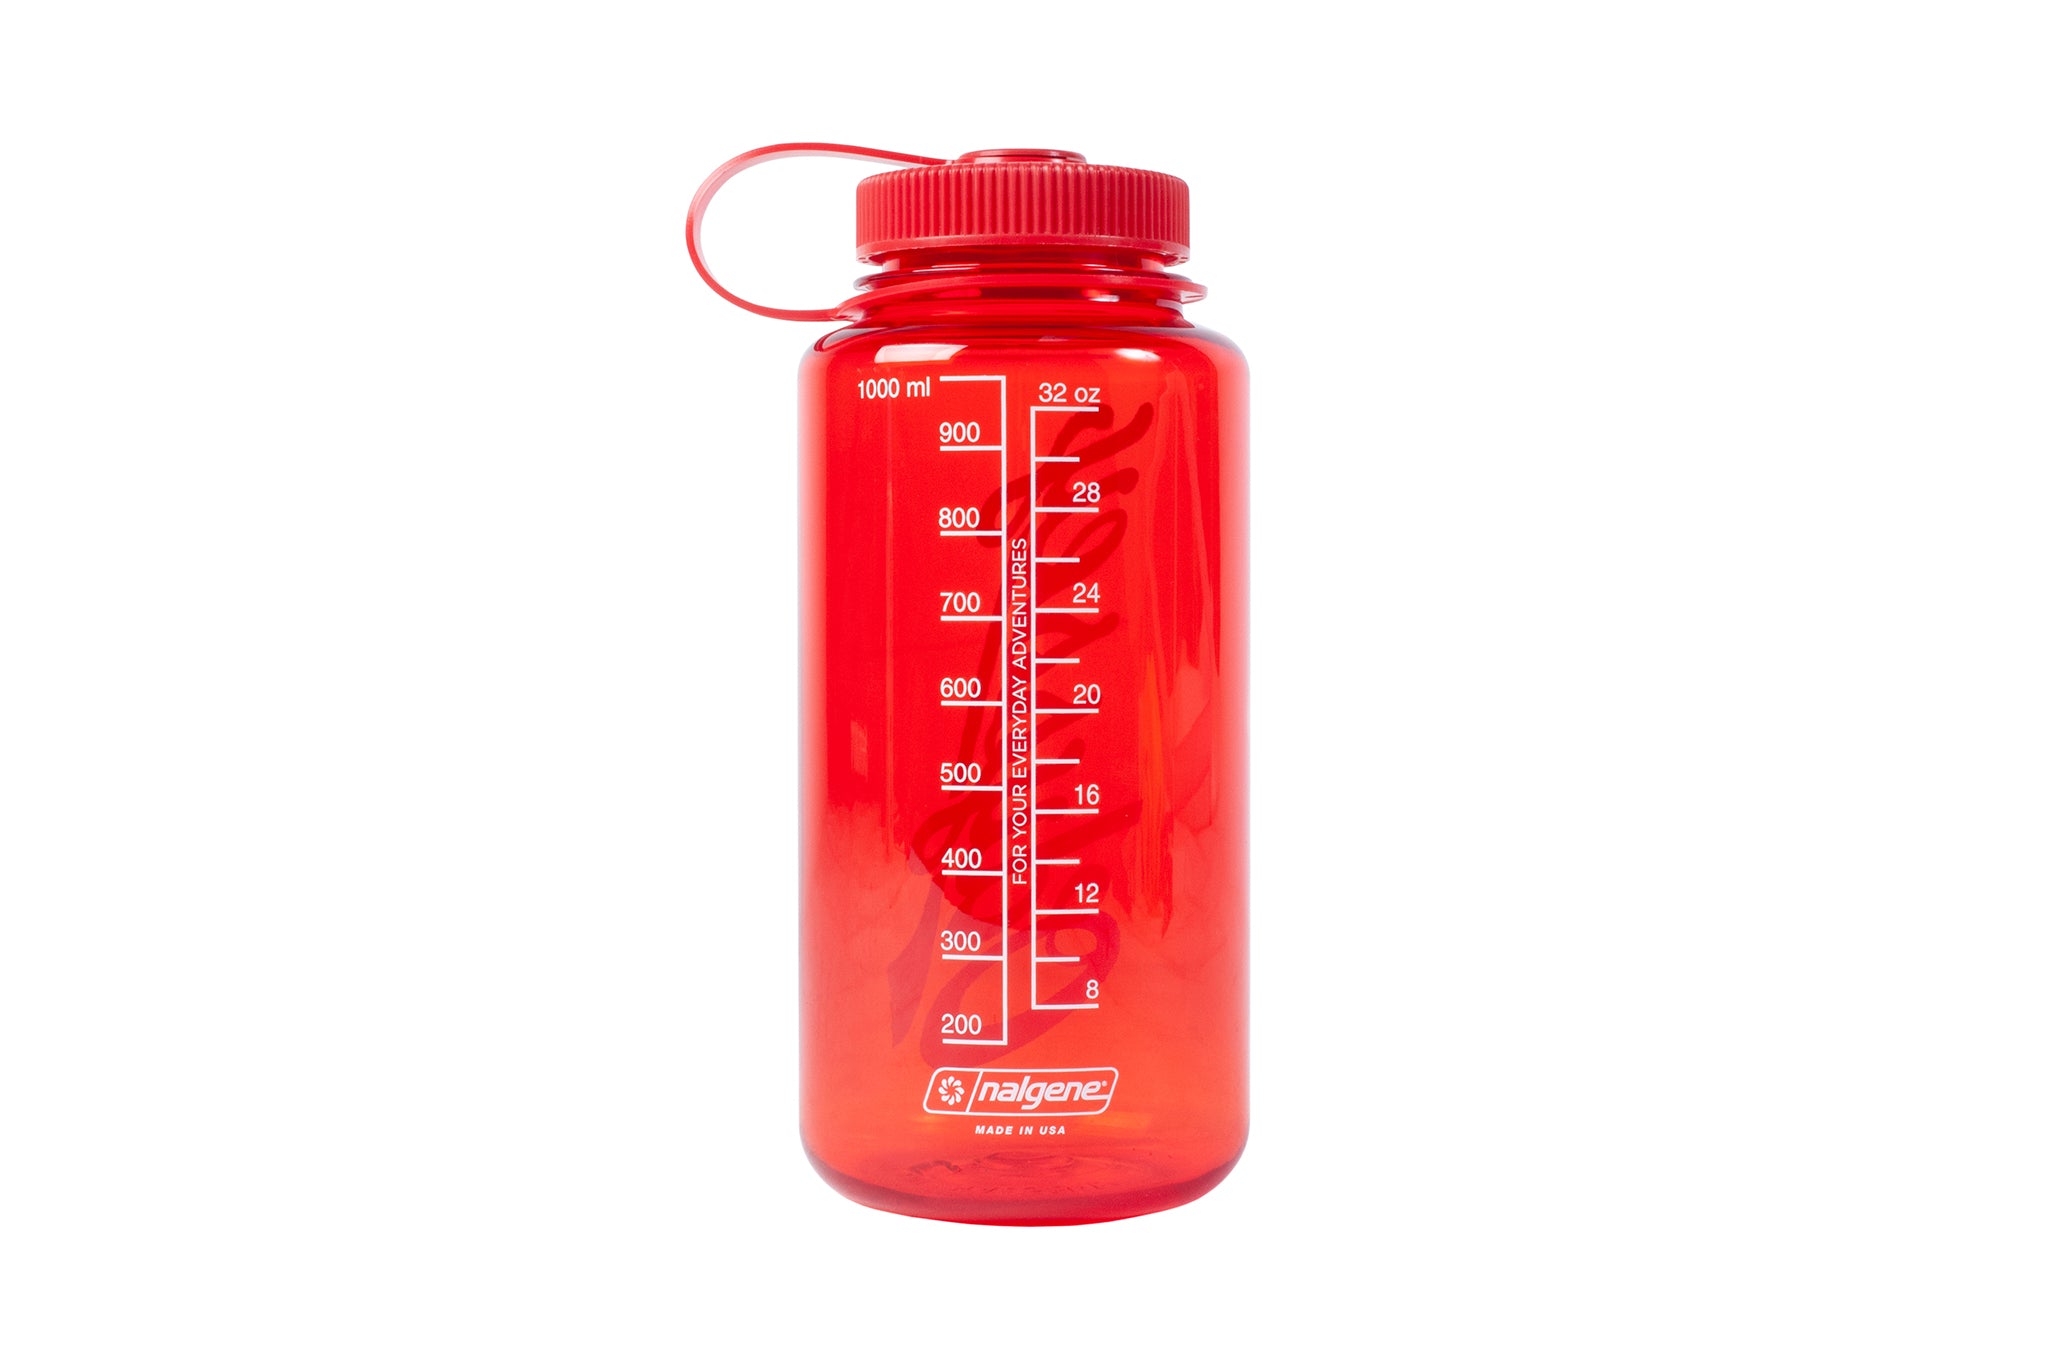 40 oz Saratoga Bottle Red Ombre